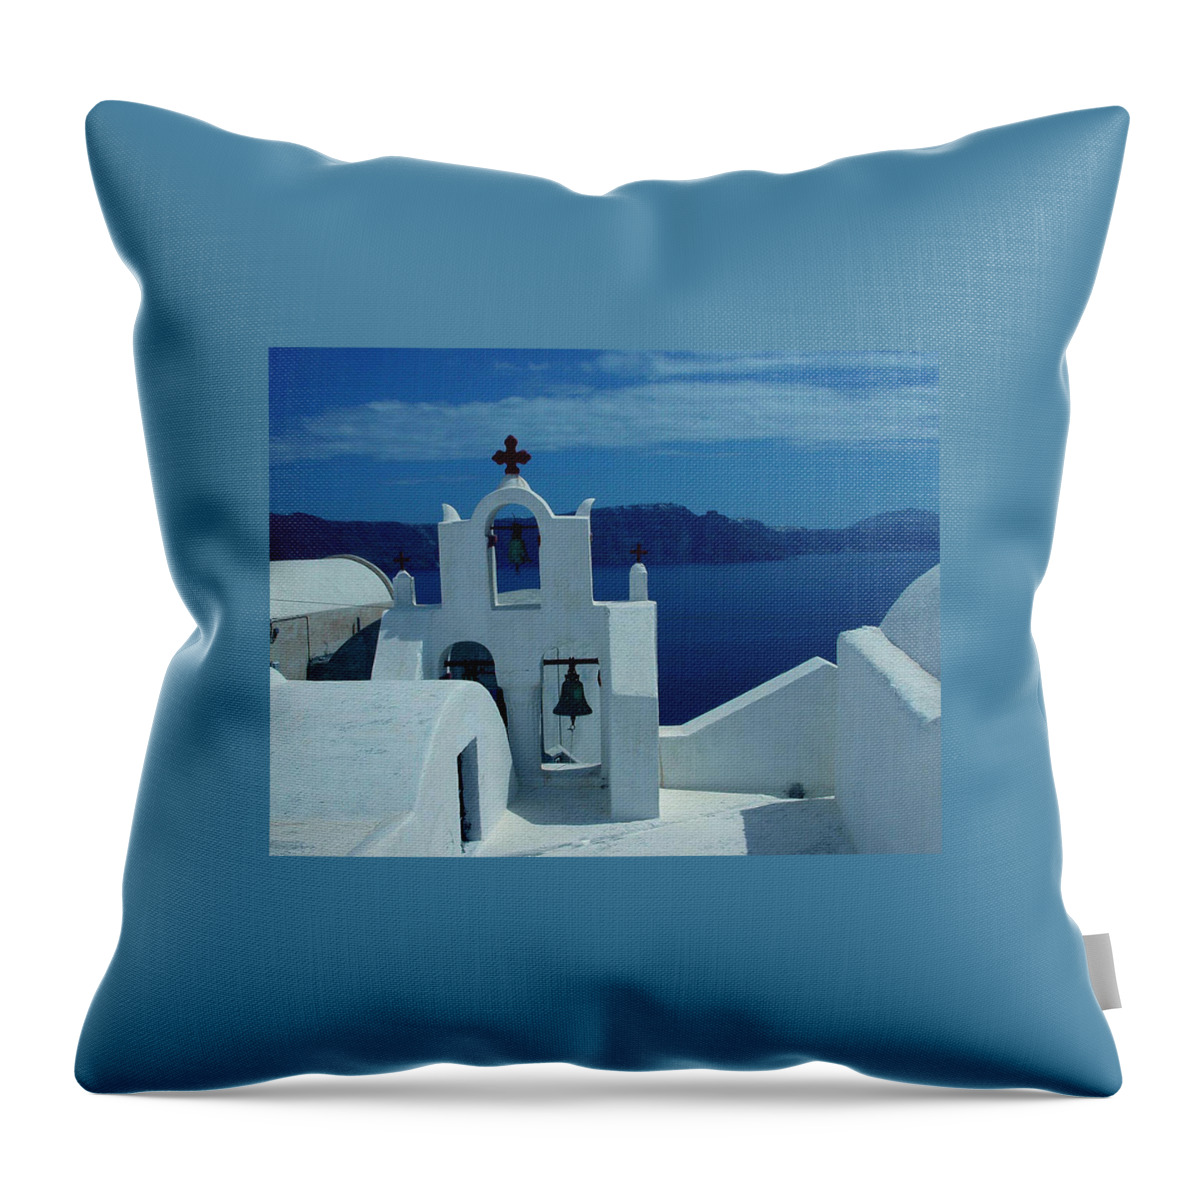 Colette Throw Pillow featuring the photograph Santorini Island Greece #2 by Colette V Hera Guggenheim